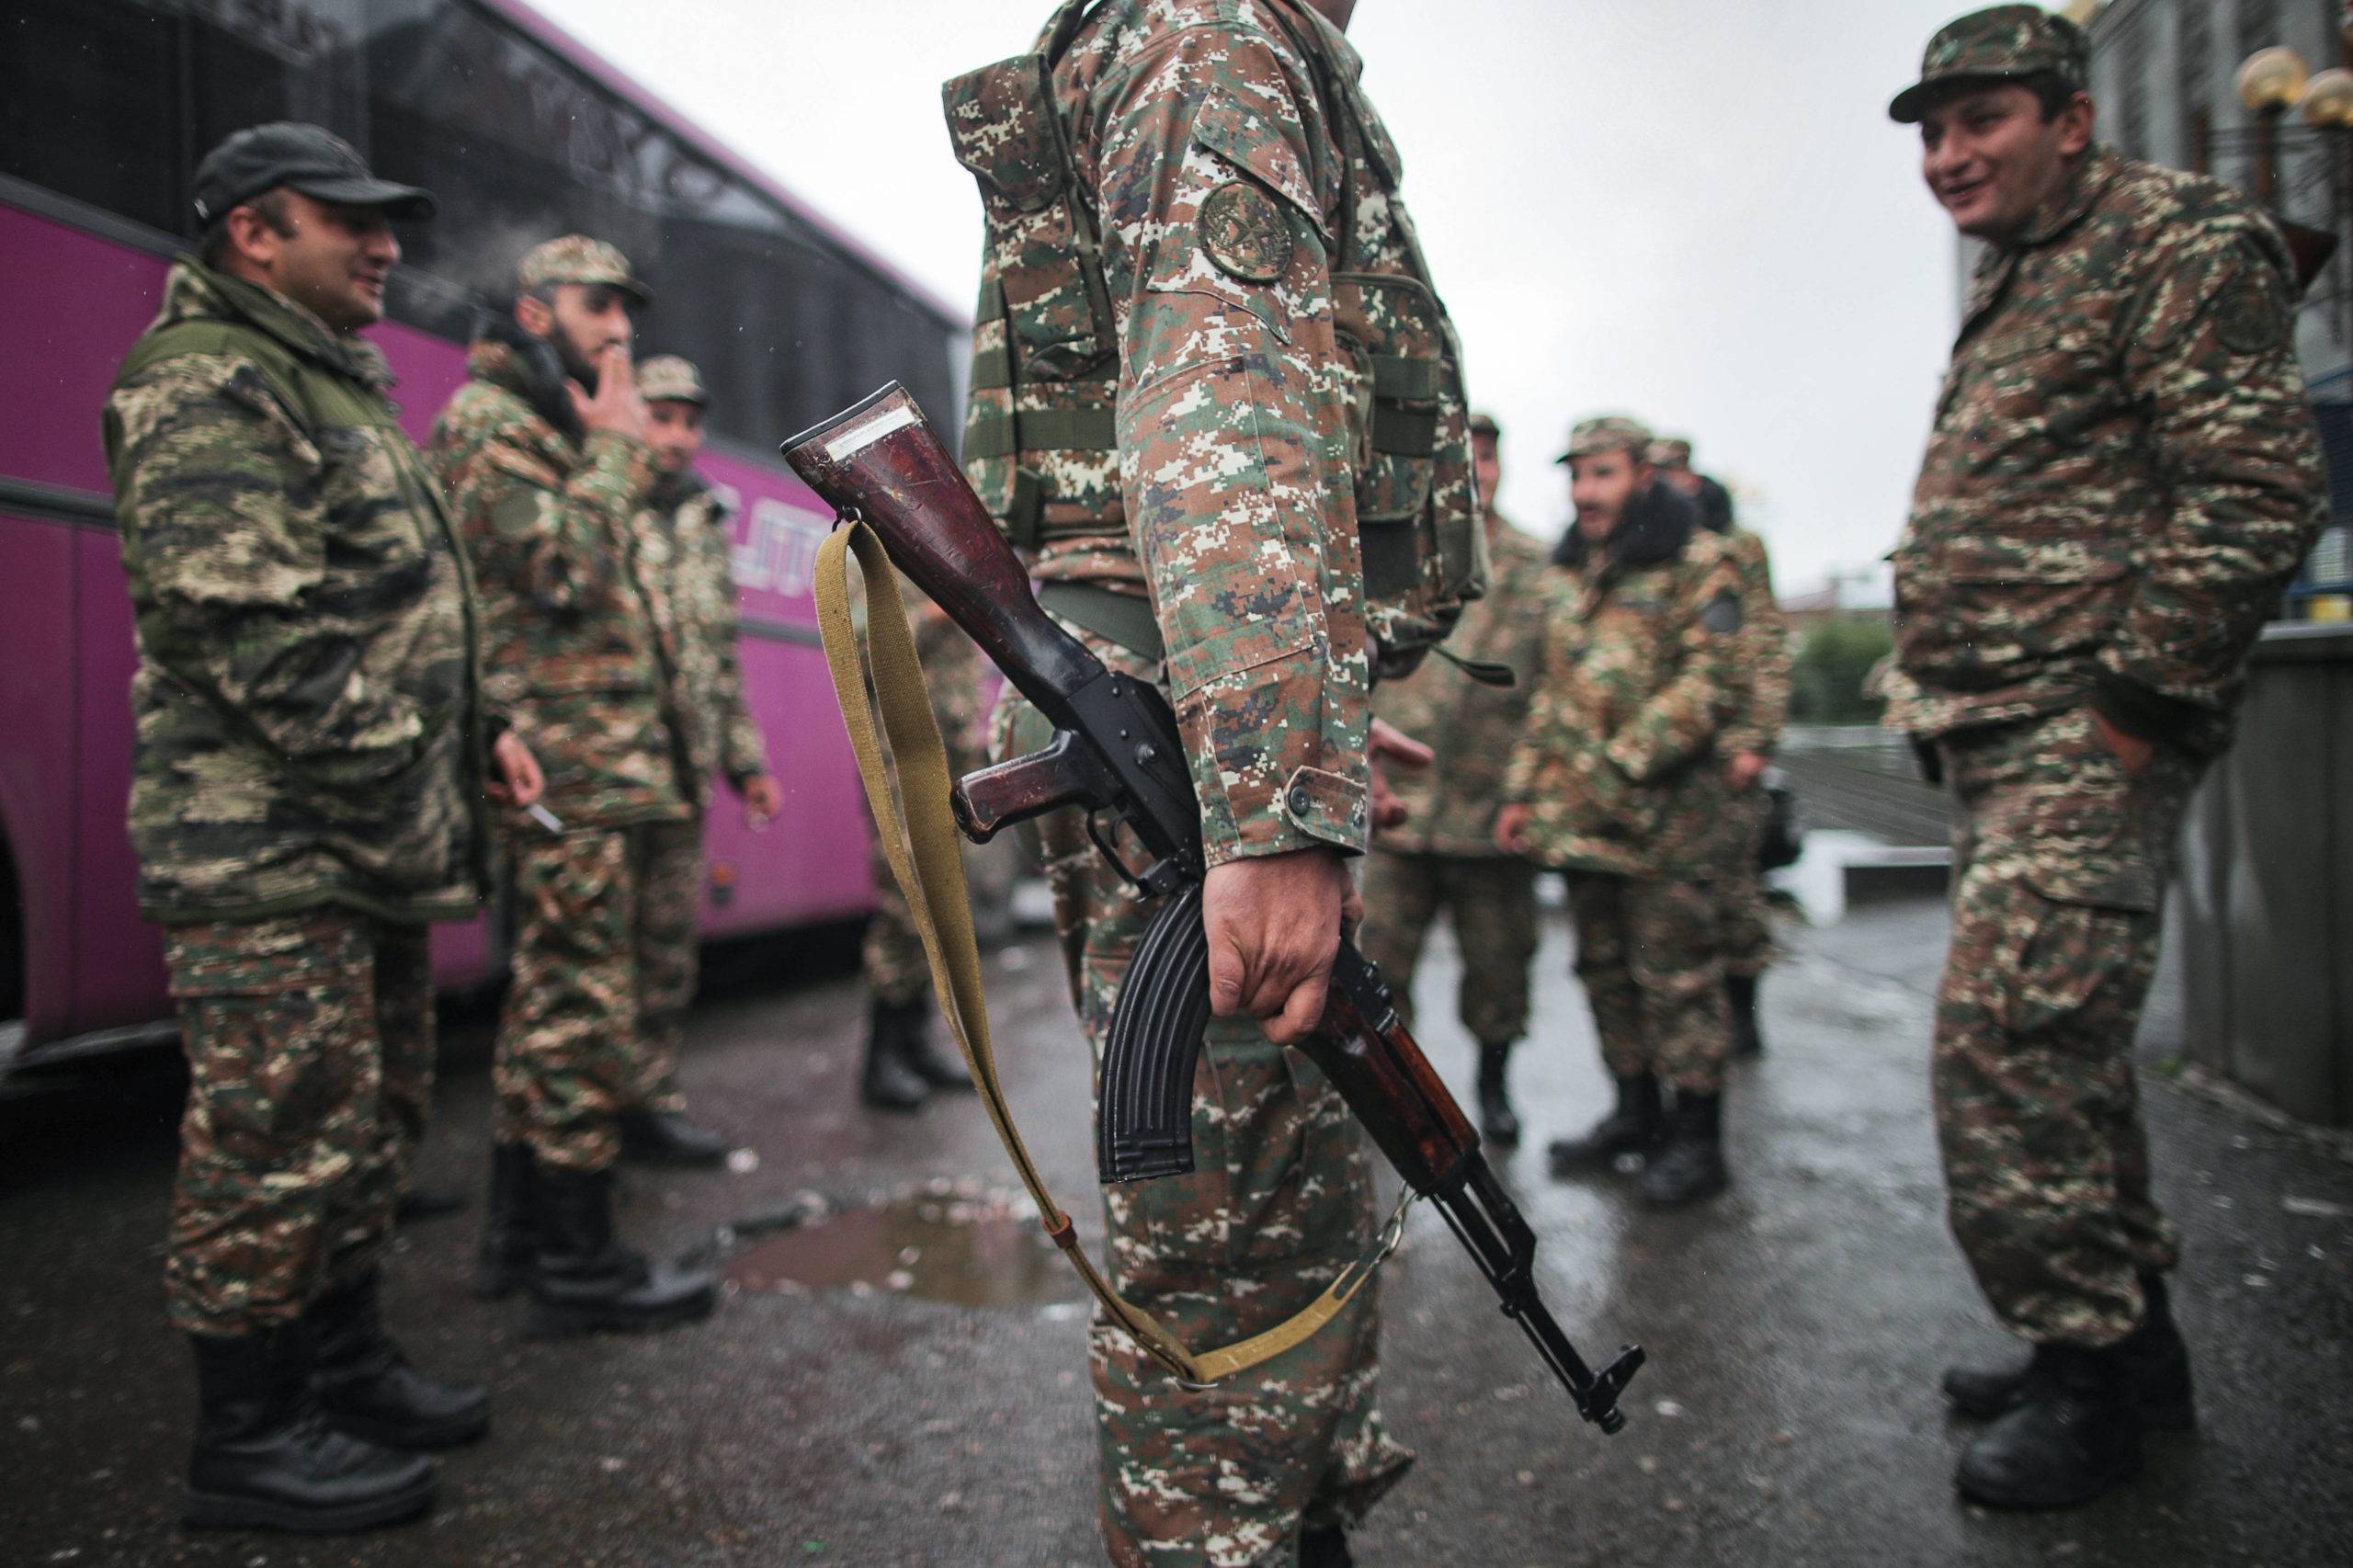 ARMENIA - OCTOBER 6, 2020: Volunteers and mobilized military personnel stand by a bus ahead of being deployed to the front line. Sergei Bobylev/TASS/Sipa USA/31023810/MB/2010061150